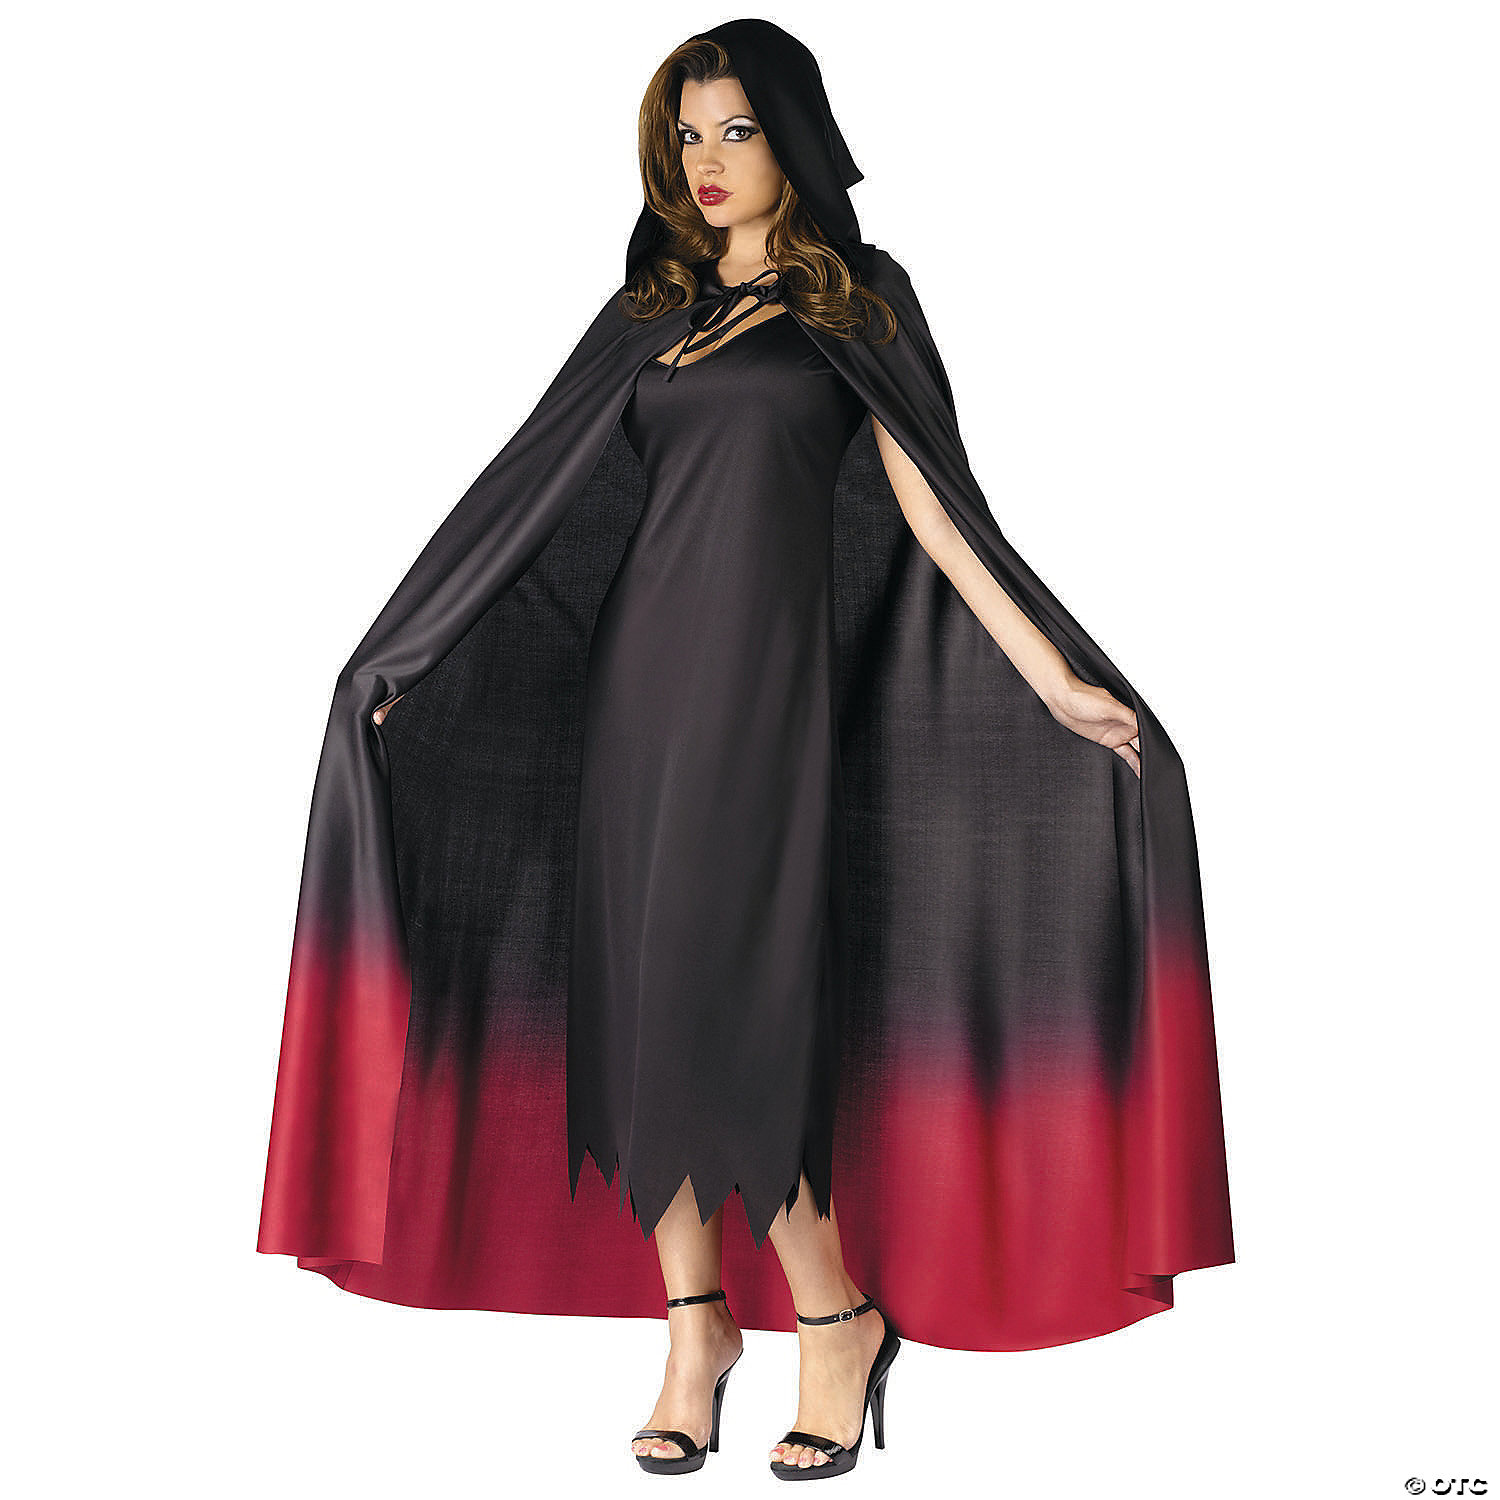 CAPE OMBRE HOODED - HALLOWEEN